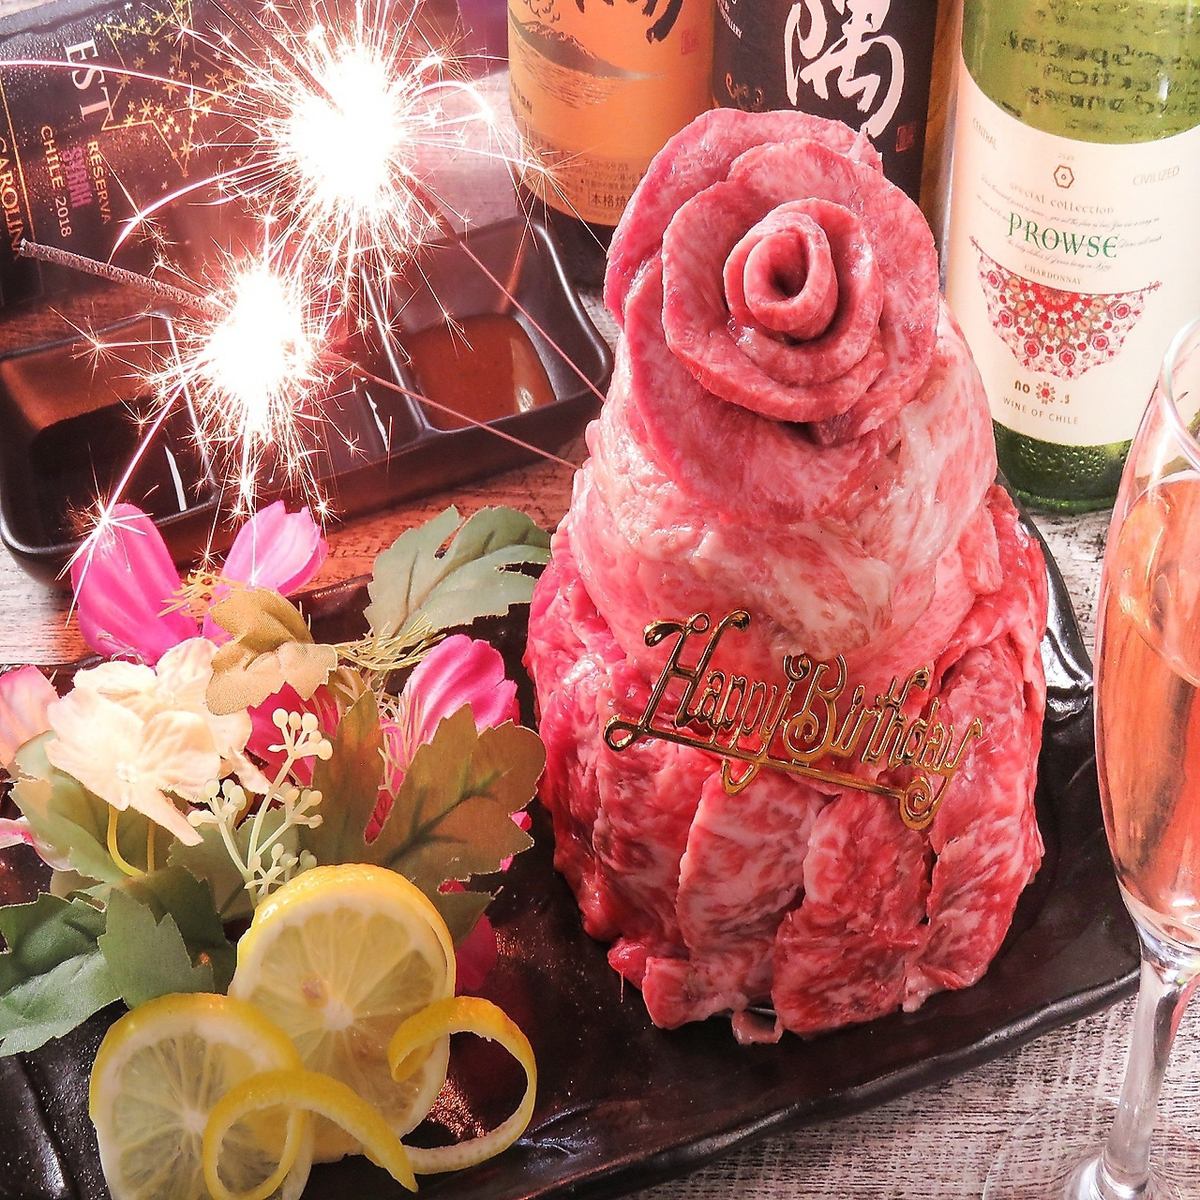 [Uses A5 rank Kobe beef] Surprise with a meat cake!